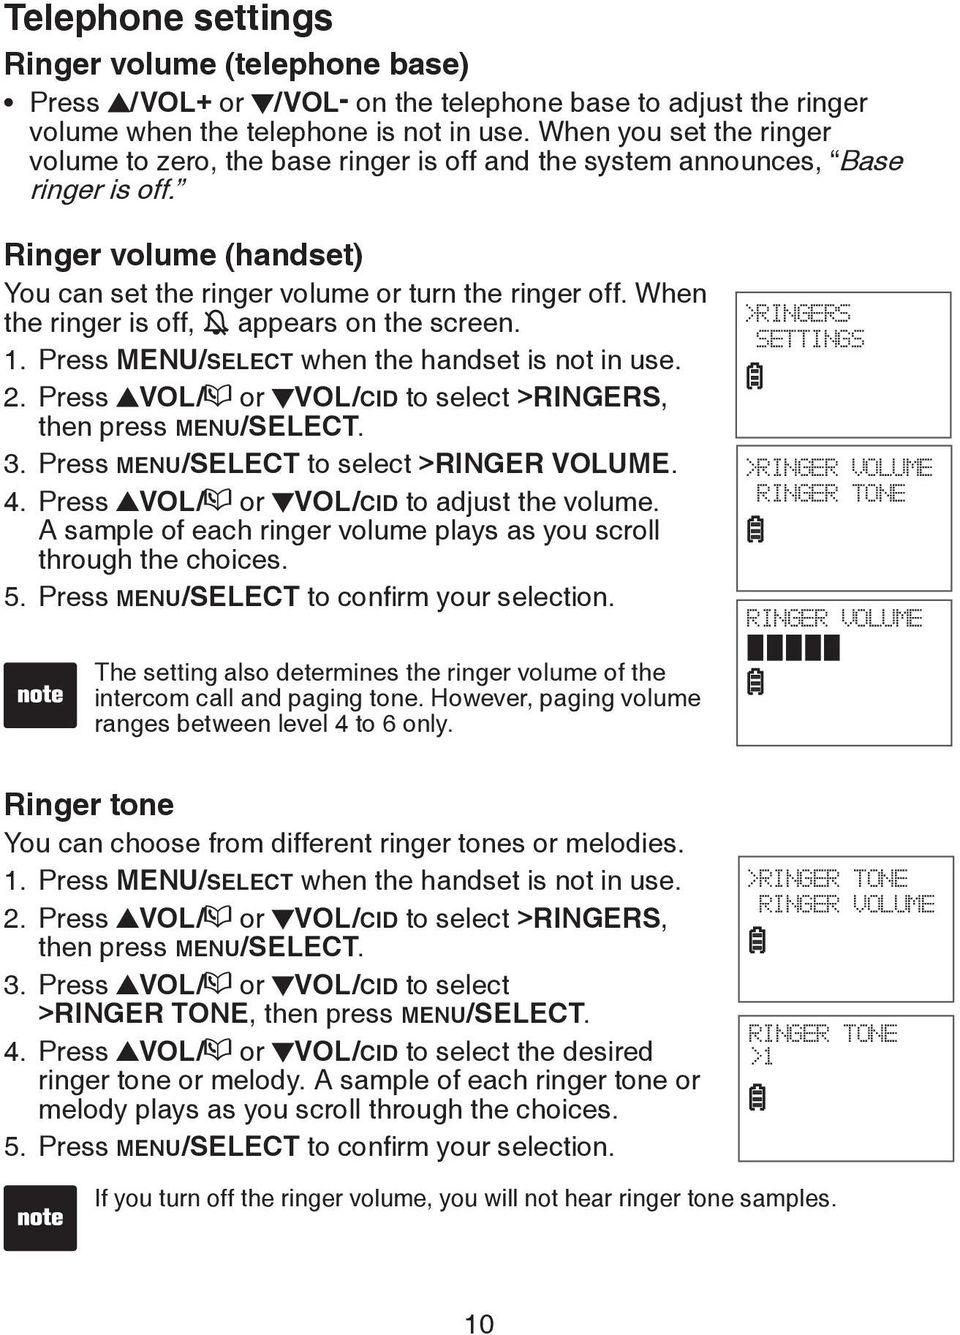 When the ringer is off, appears on the screen. 1. Press MENU/SELECT when the handset is not in use. 2. Press VOL/ or VOL/CID to select >RINGERS, then press MENU/SELECT. 3.